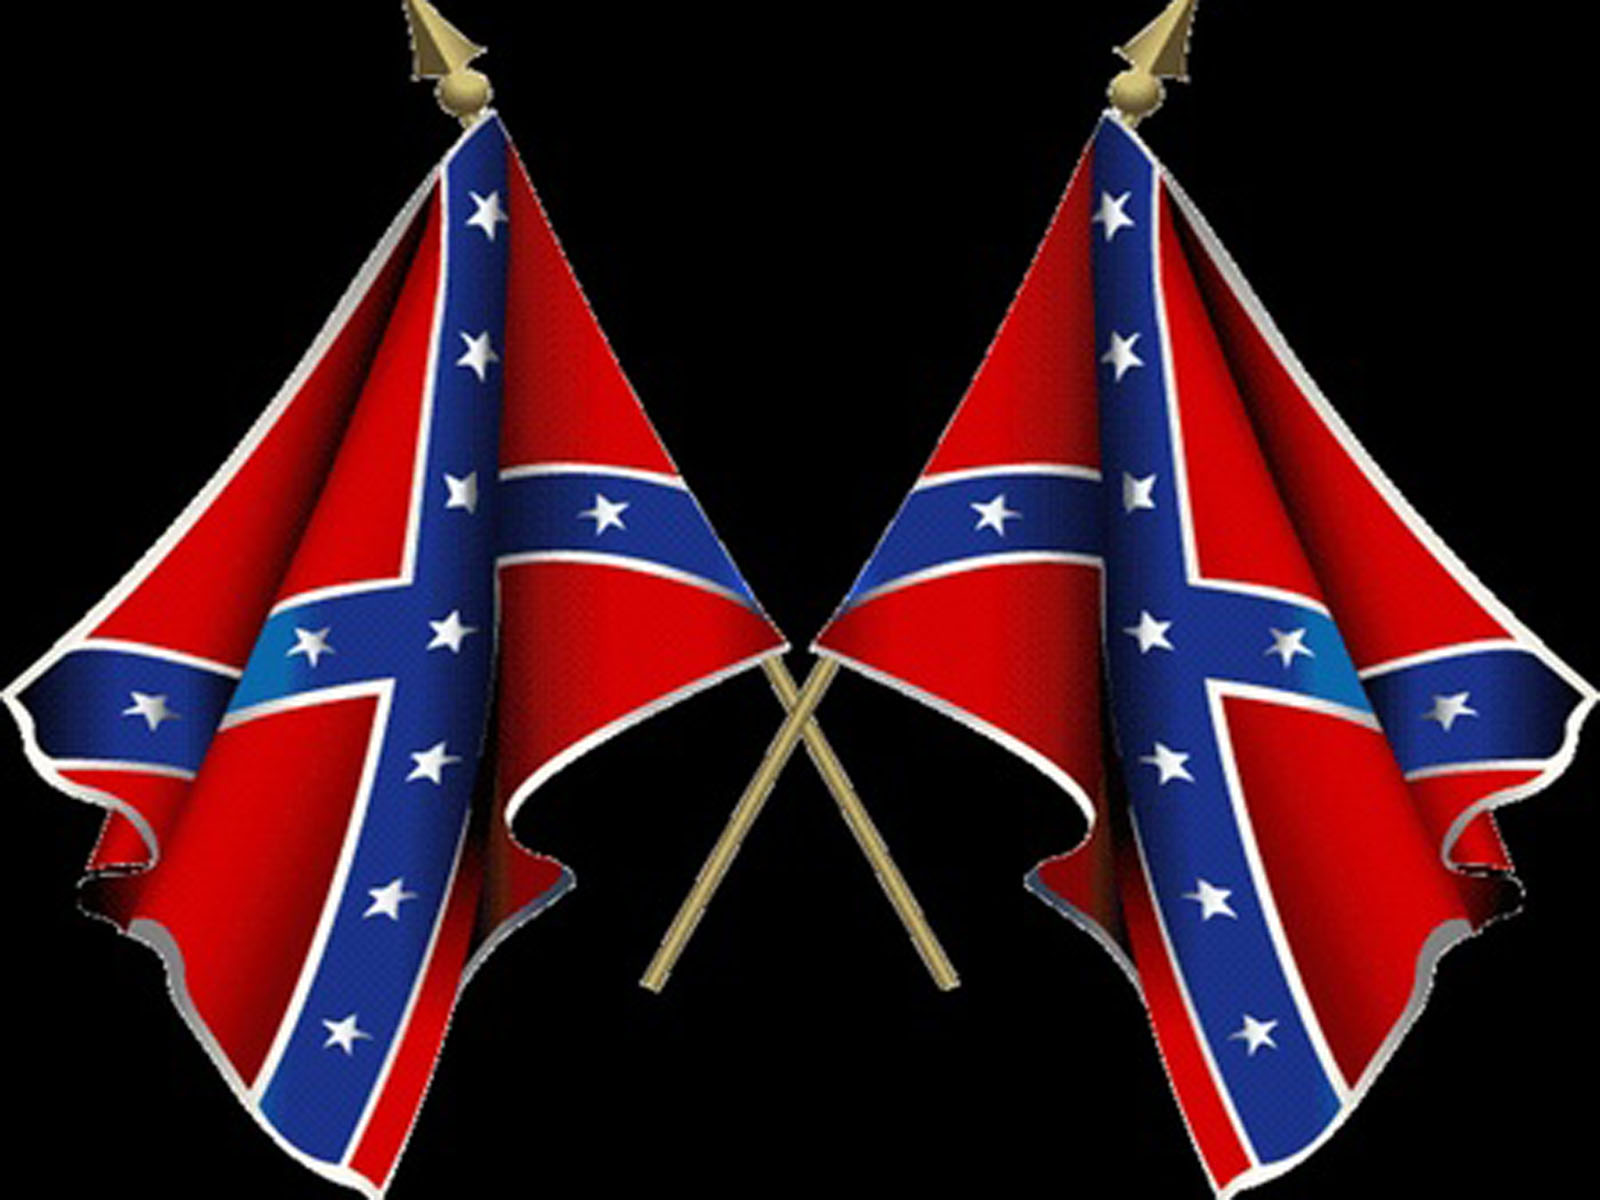 Have Read This Article The Texas Confederate Flag Wallpaper And Rebel